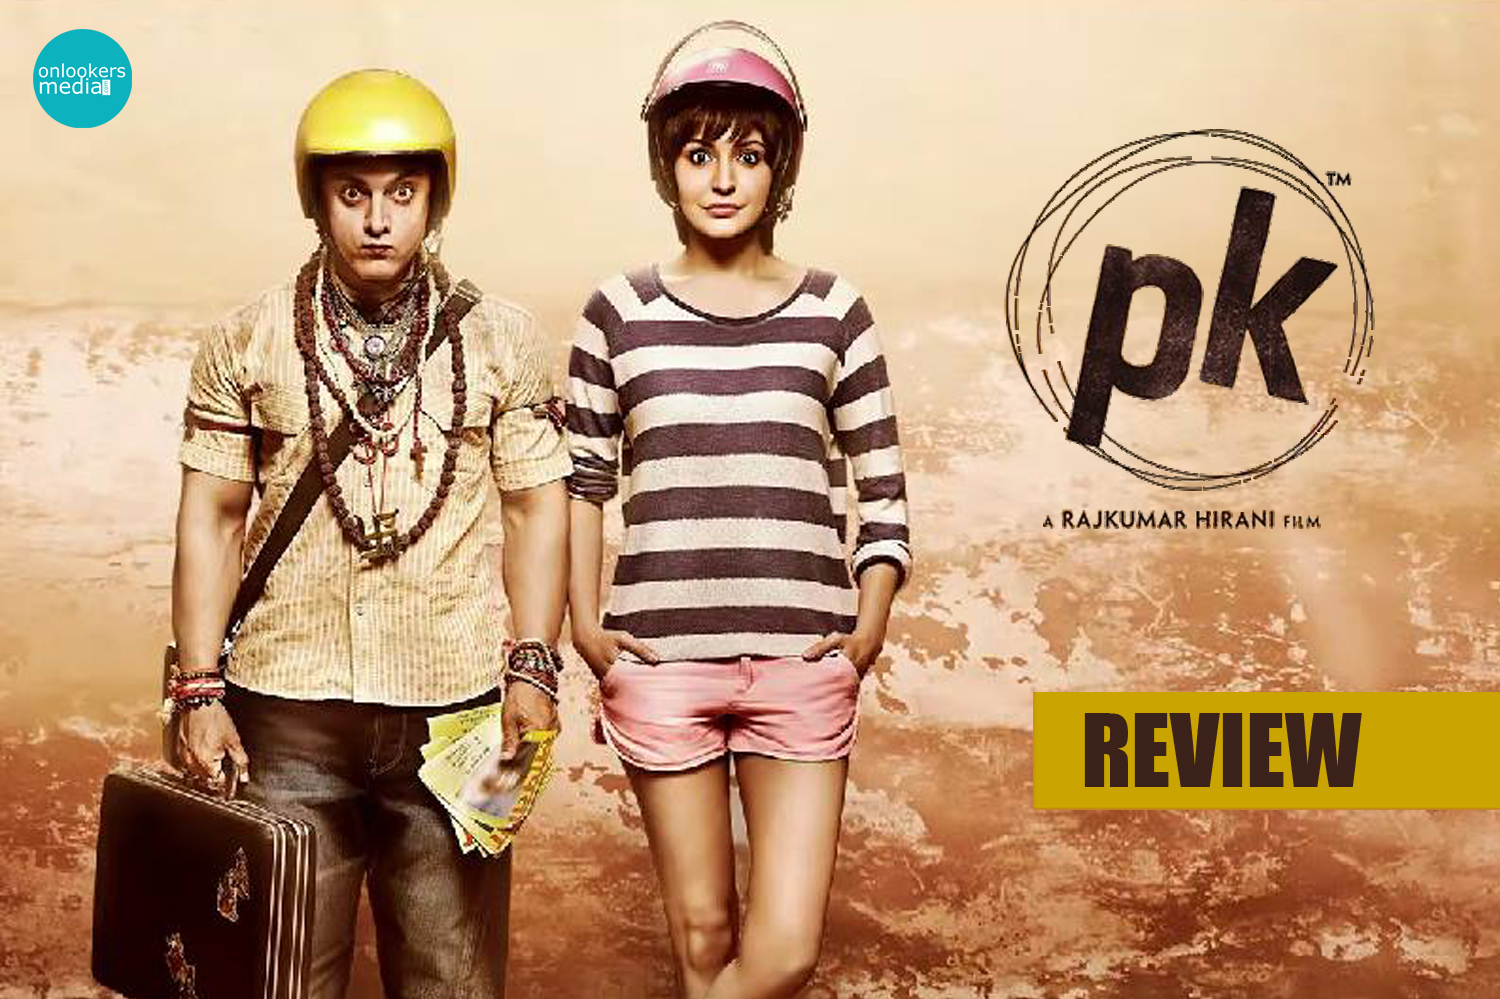 PK Review-Rating-Collection-Theater Report-Anushka Sharma-Aamir Khan-Onlookers Media